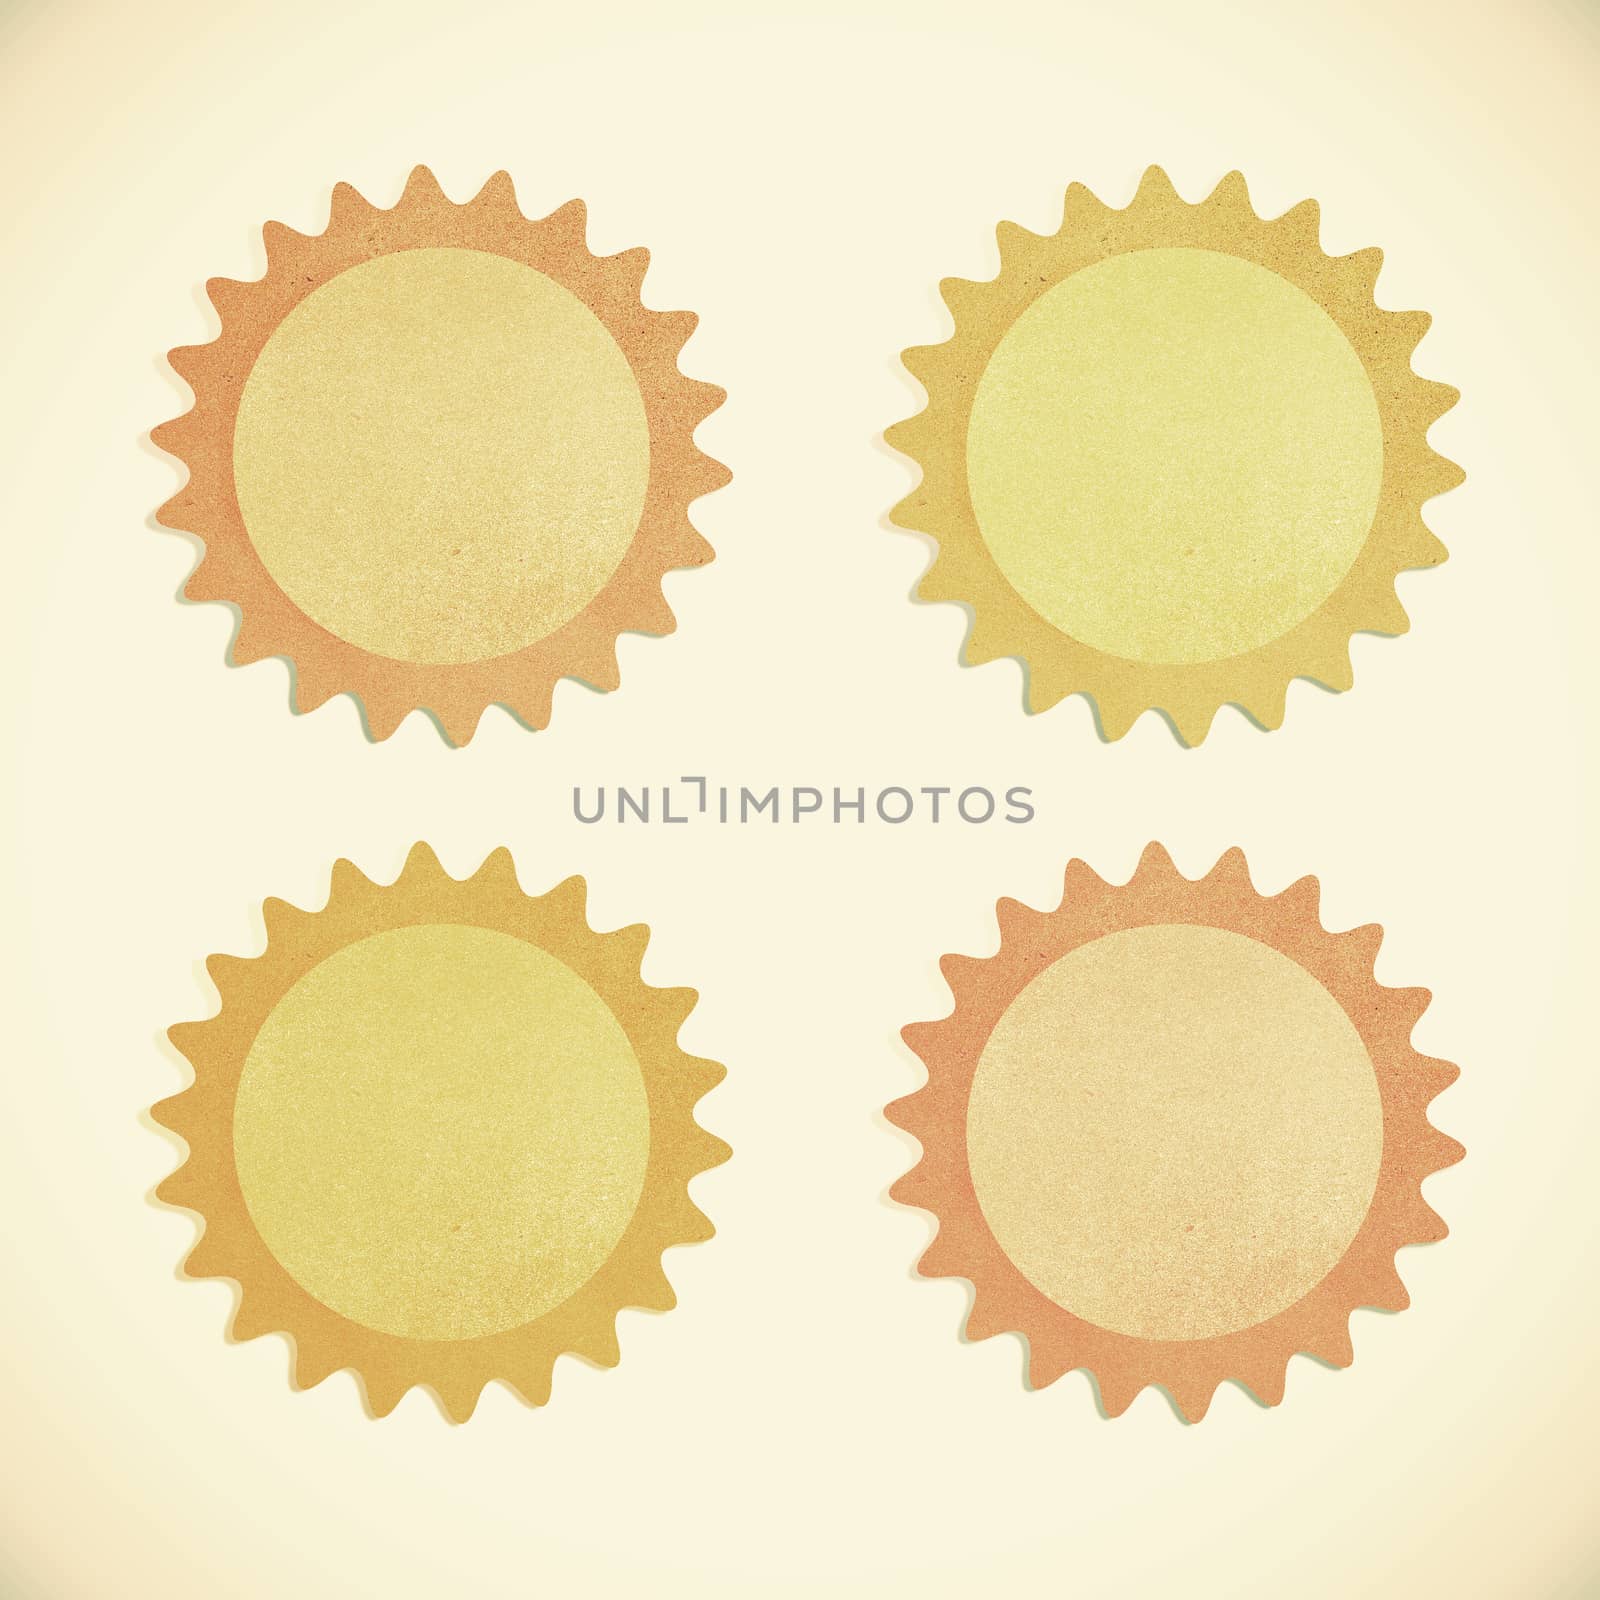 Grunge recycled paper sun on vintage tone background by jakgree